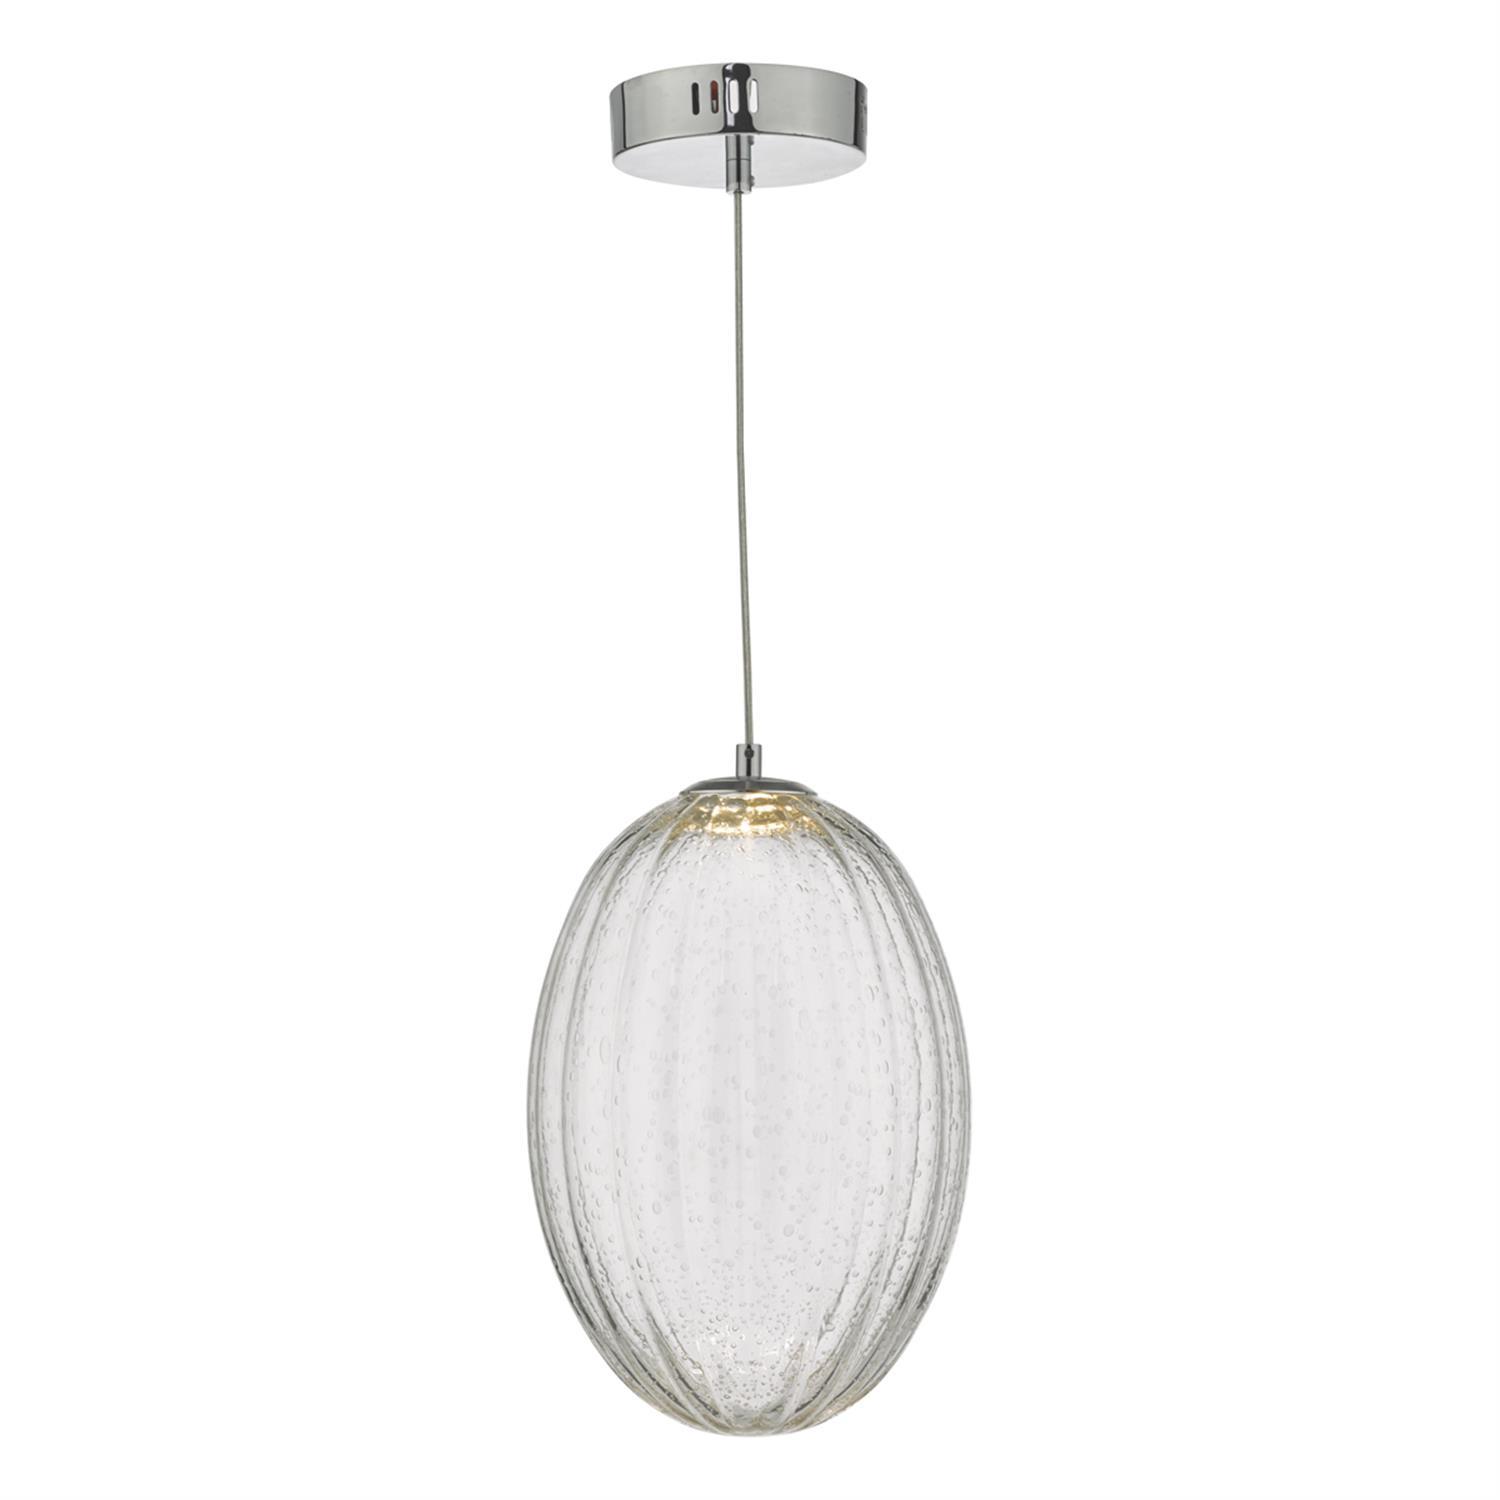 Tyona Polished Chrome And Clear Glass Ceiling Pendant TYO0108